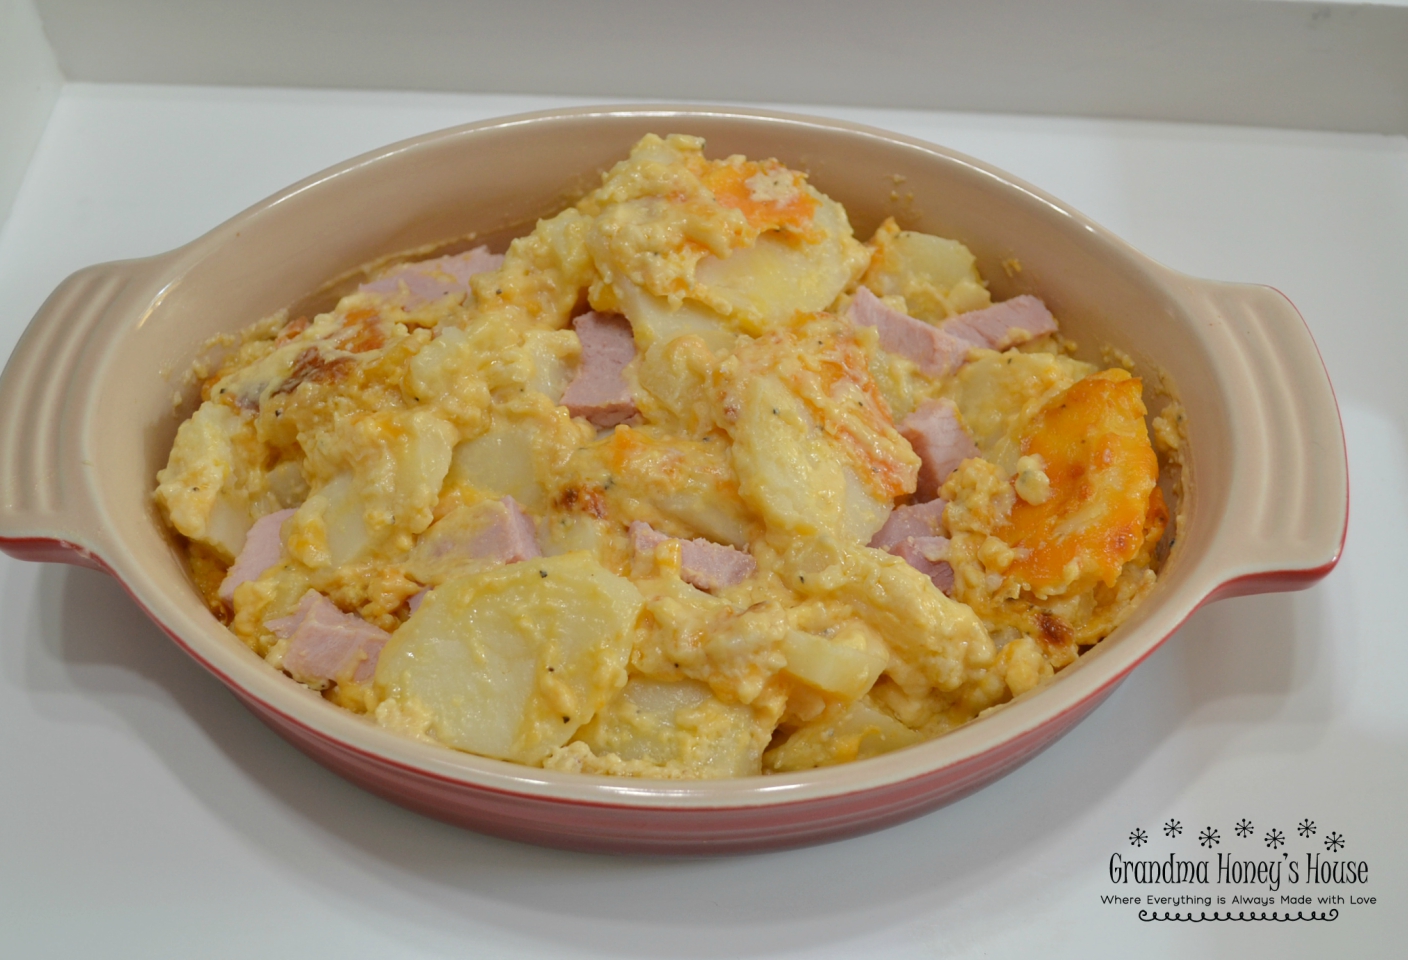 An Old Fashioned Scalloped Potato recipe packed with a rich creamy, cheesy sauce